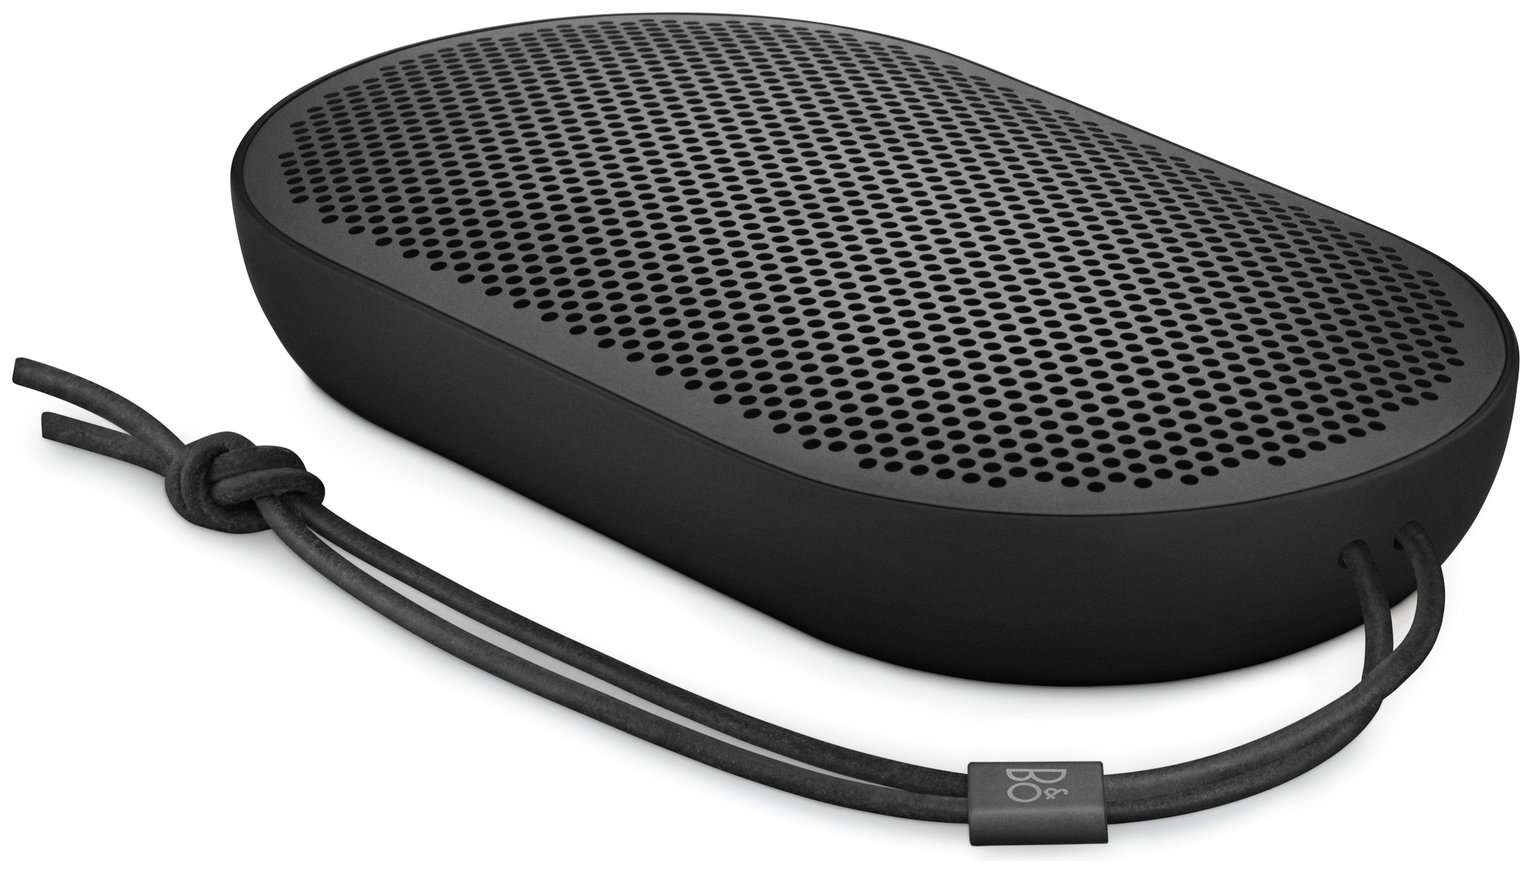 B&O Beoplay P2 Bluetooth Speaker Review